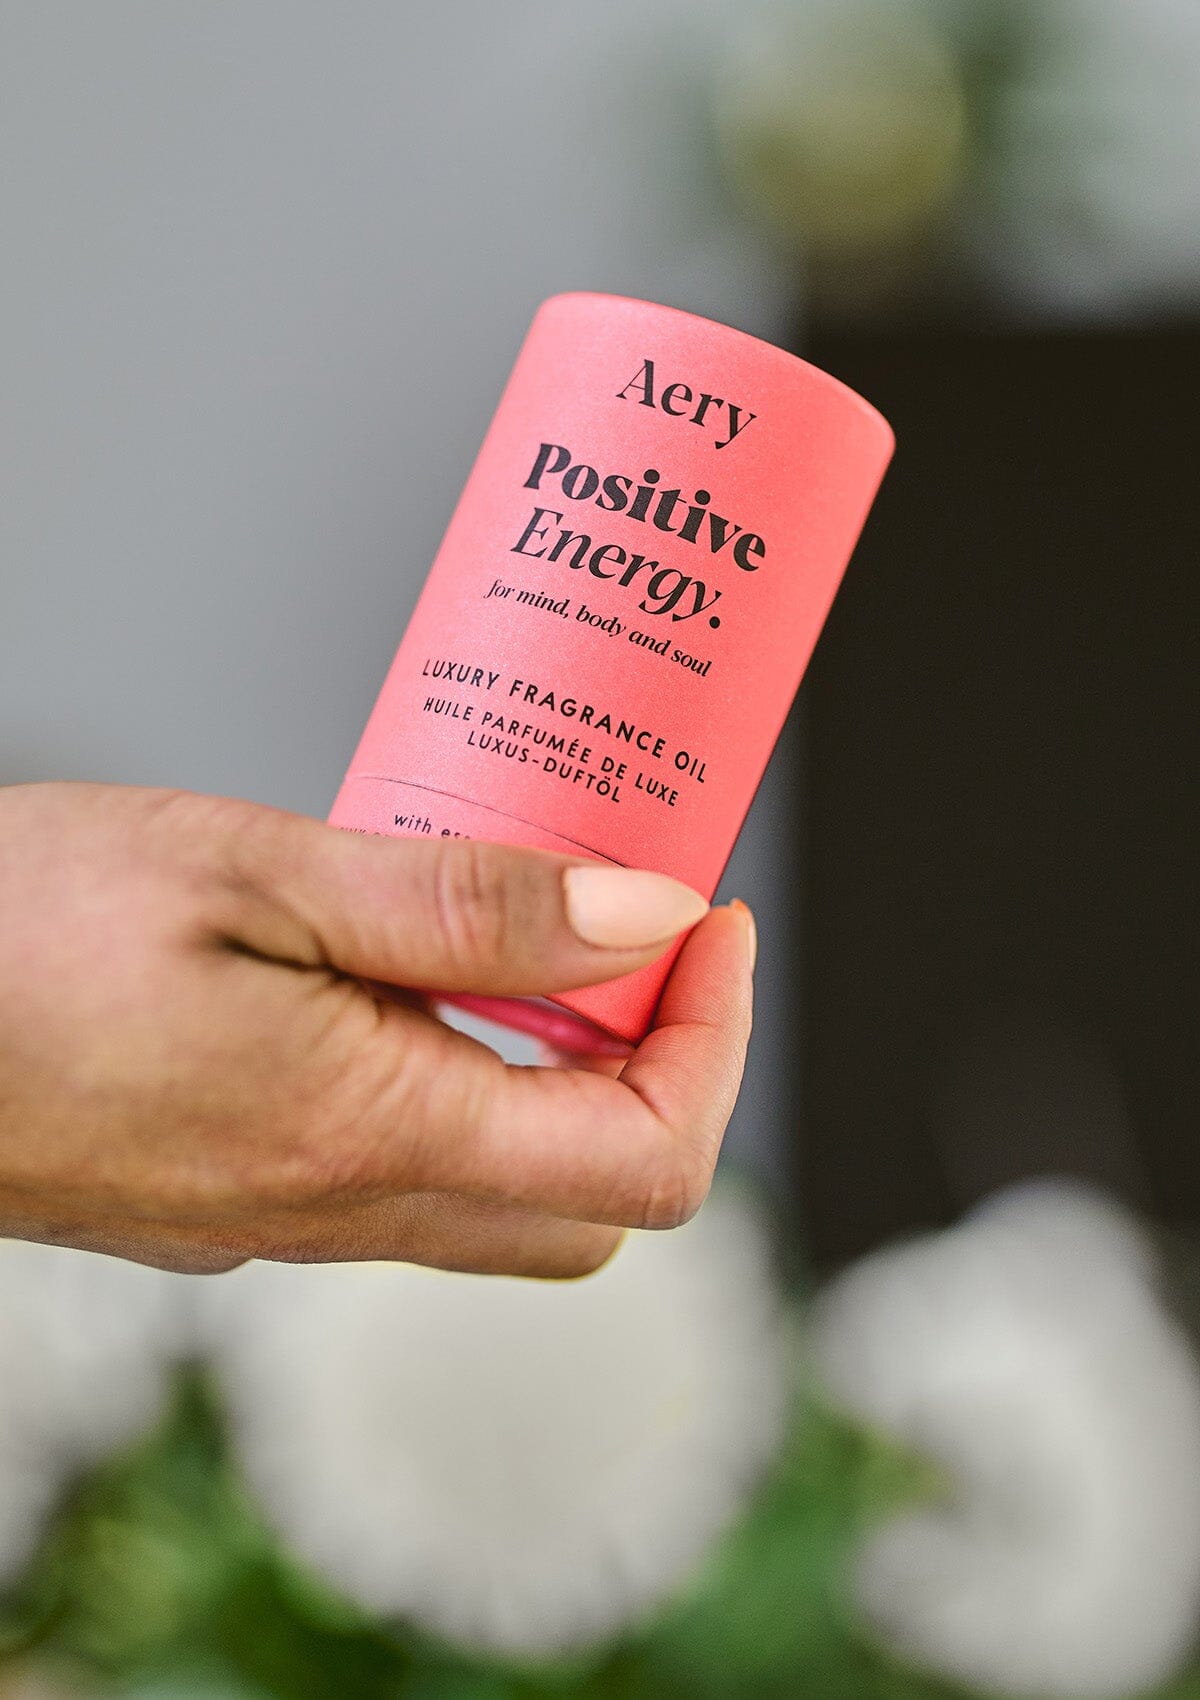 Red Positive Energy fragrance oil  product packaging by Aery displayed in hand 